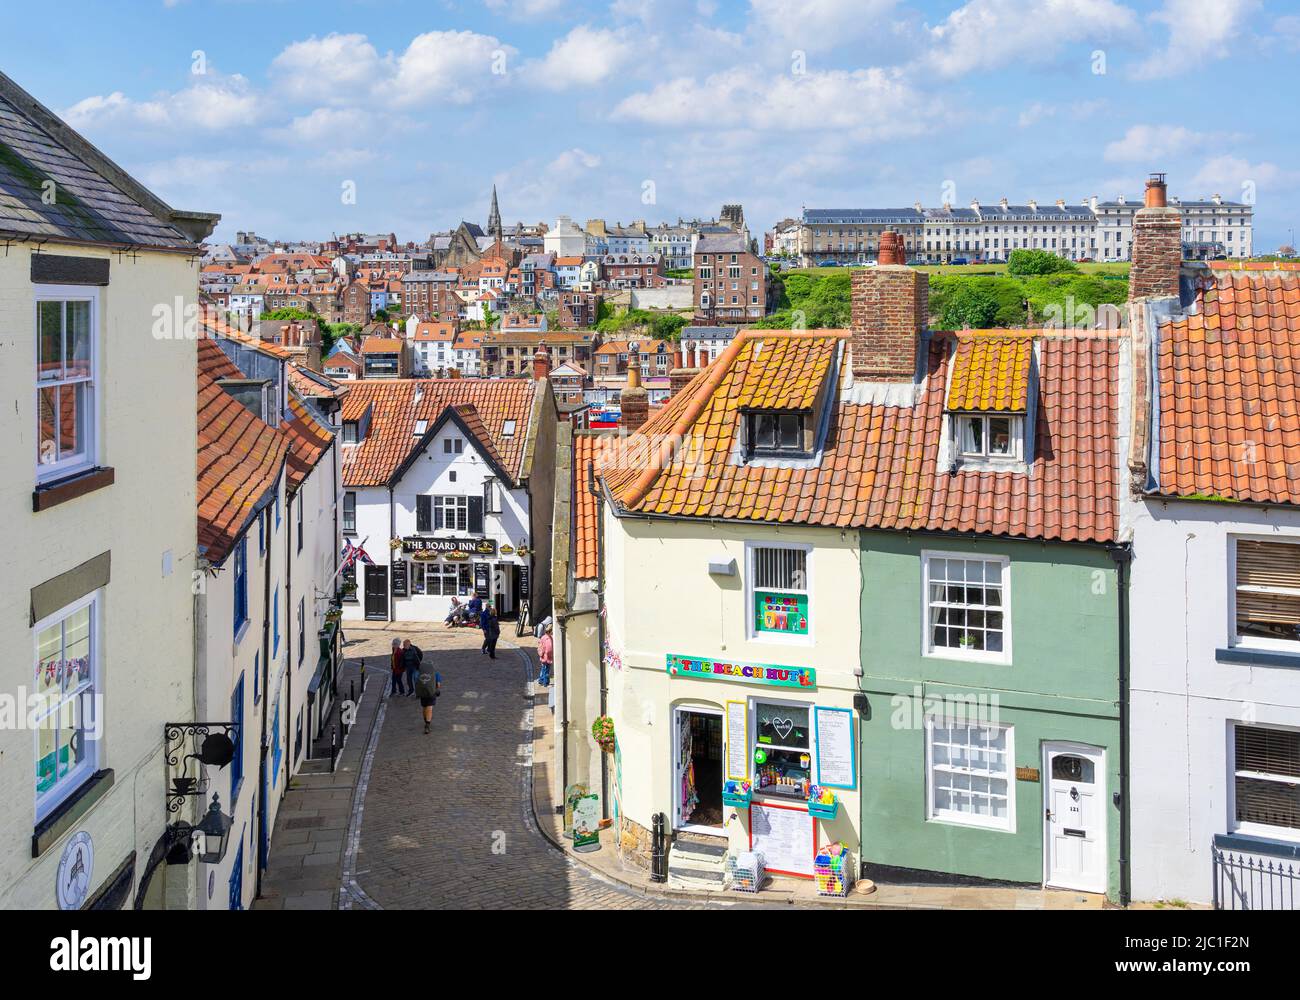 Whitby Yorkshire Church Lane shops and The Board Inn pub seen from the Abbey steps Whitby North Yorkshire England Great Britain UK GB Europe Stock Photo